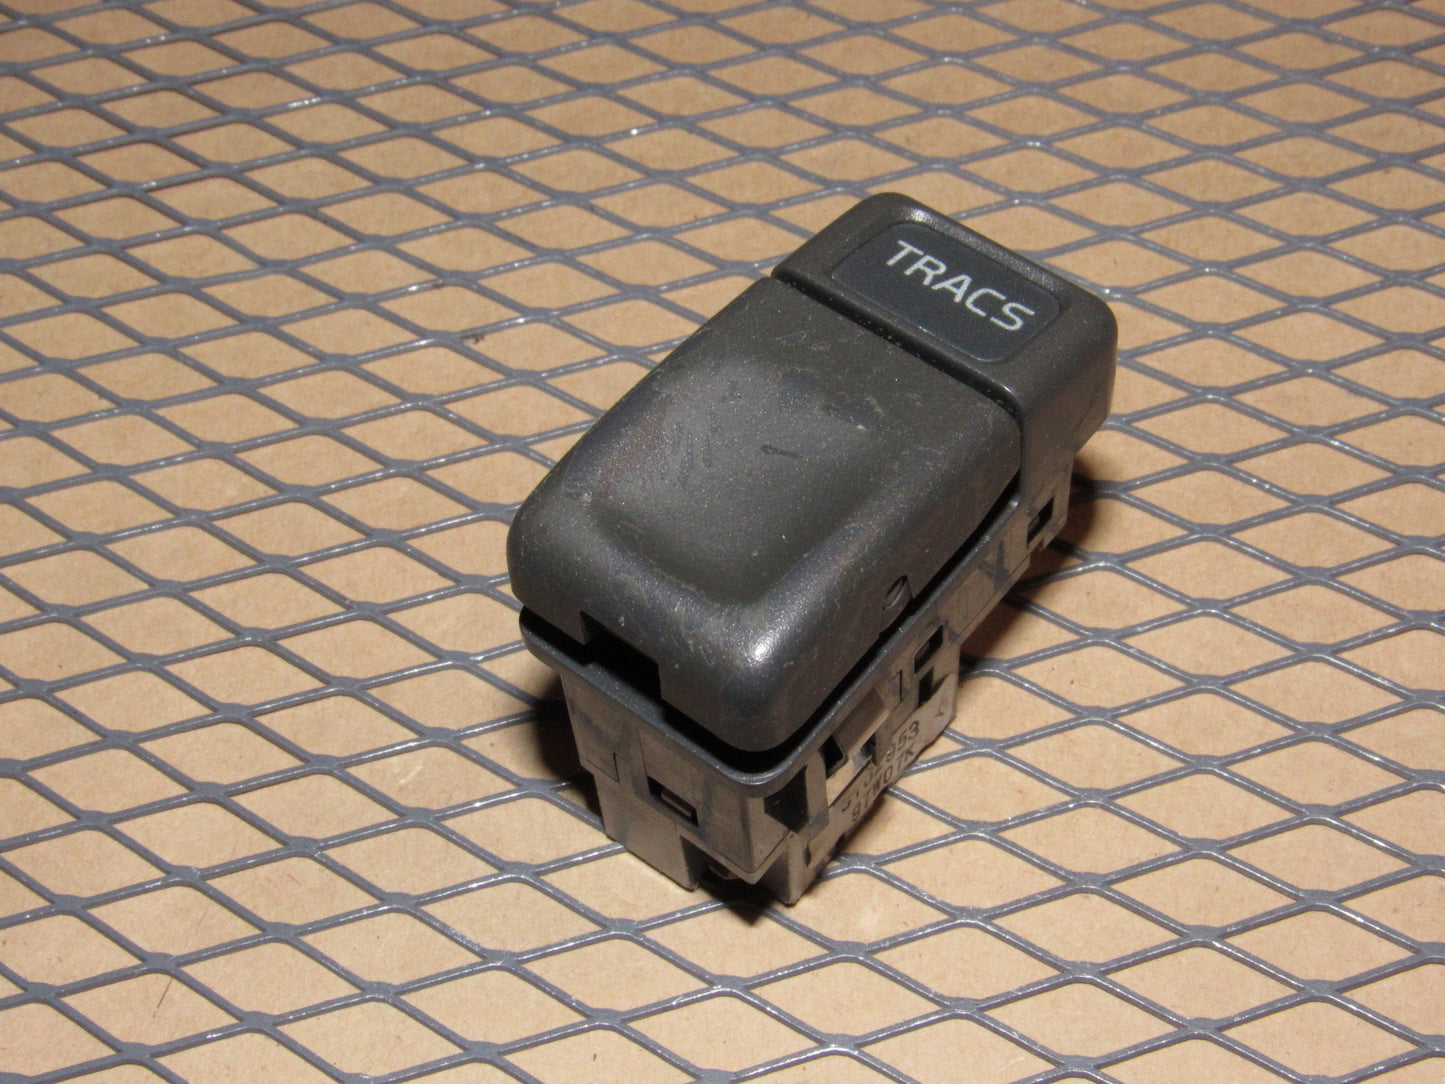 98 99 00 Volvo S70 OEM Traction Tracs Switch